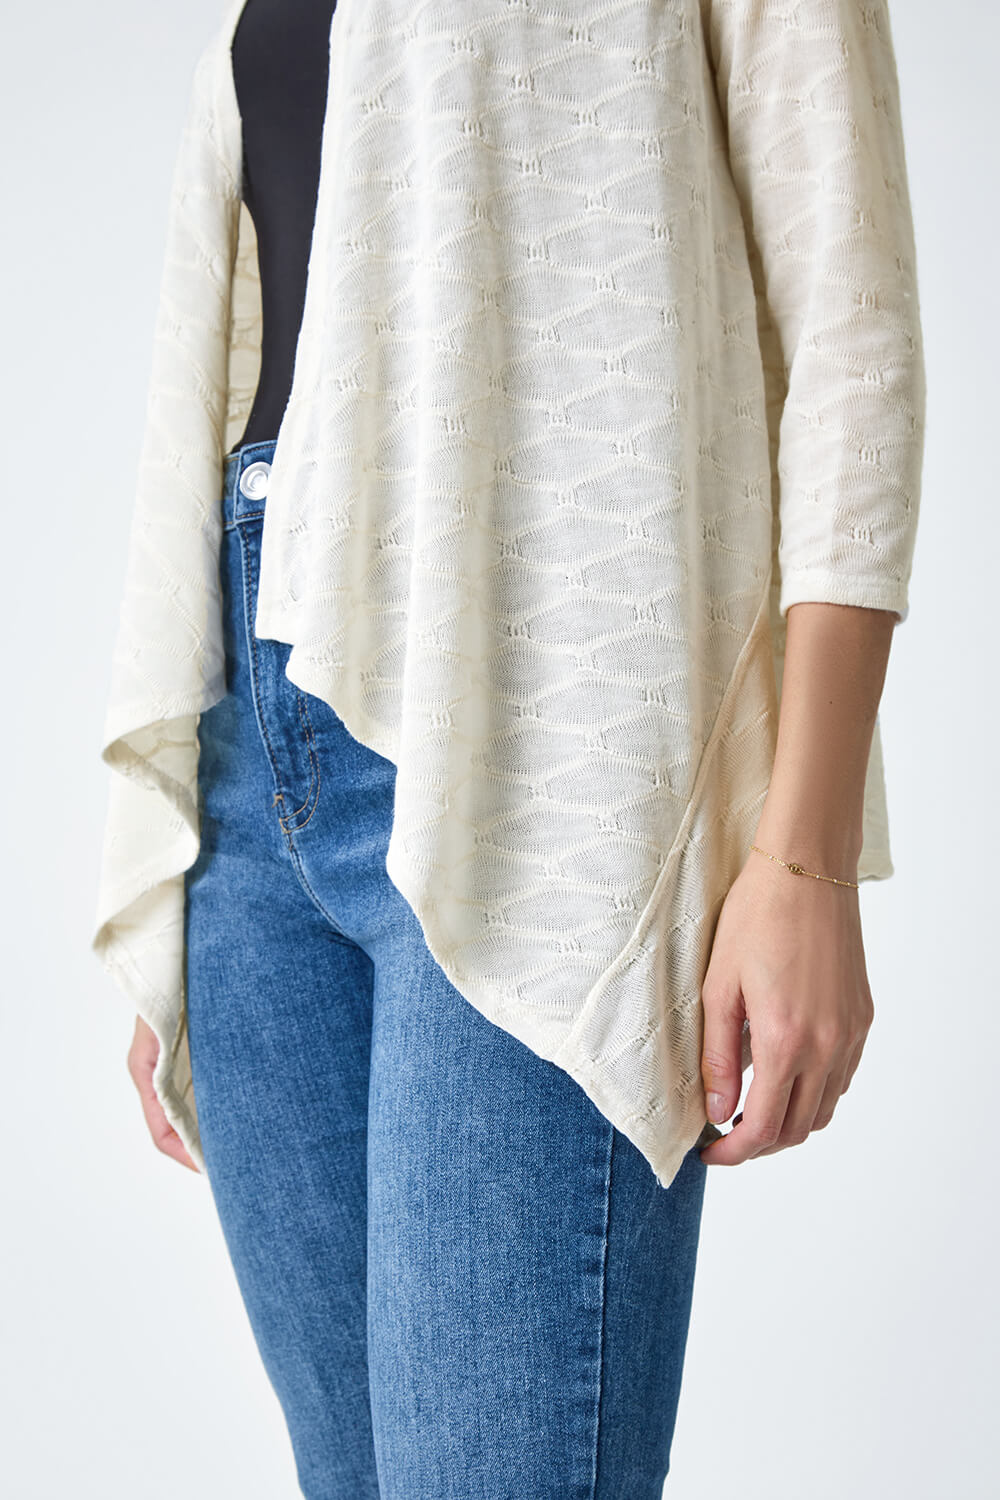 Stone Textured Waterfall Knit Cardigan, Image 5 of 5